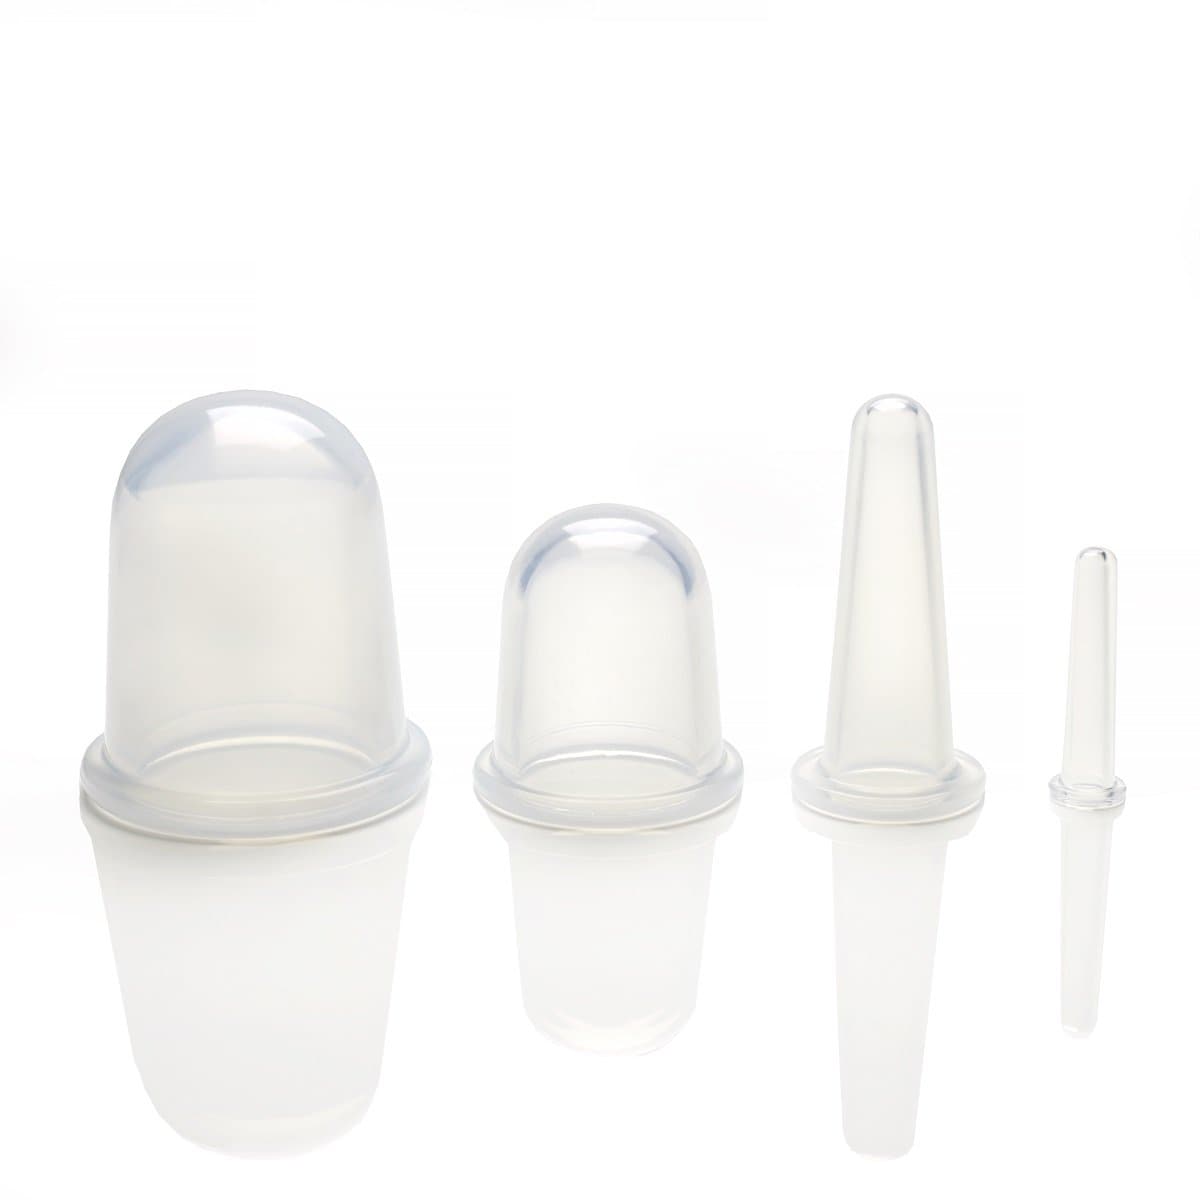 Silicone Cups (4pc Body Set), Nature's Blends